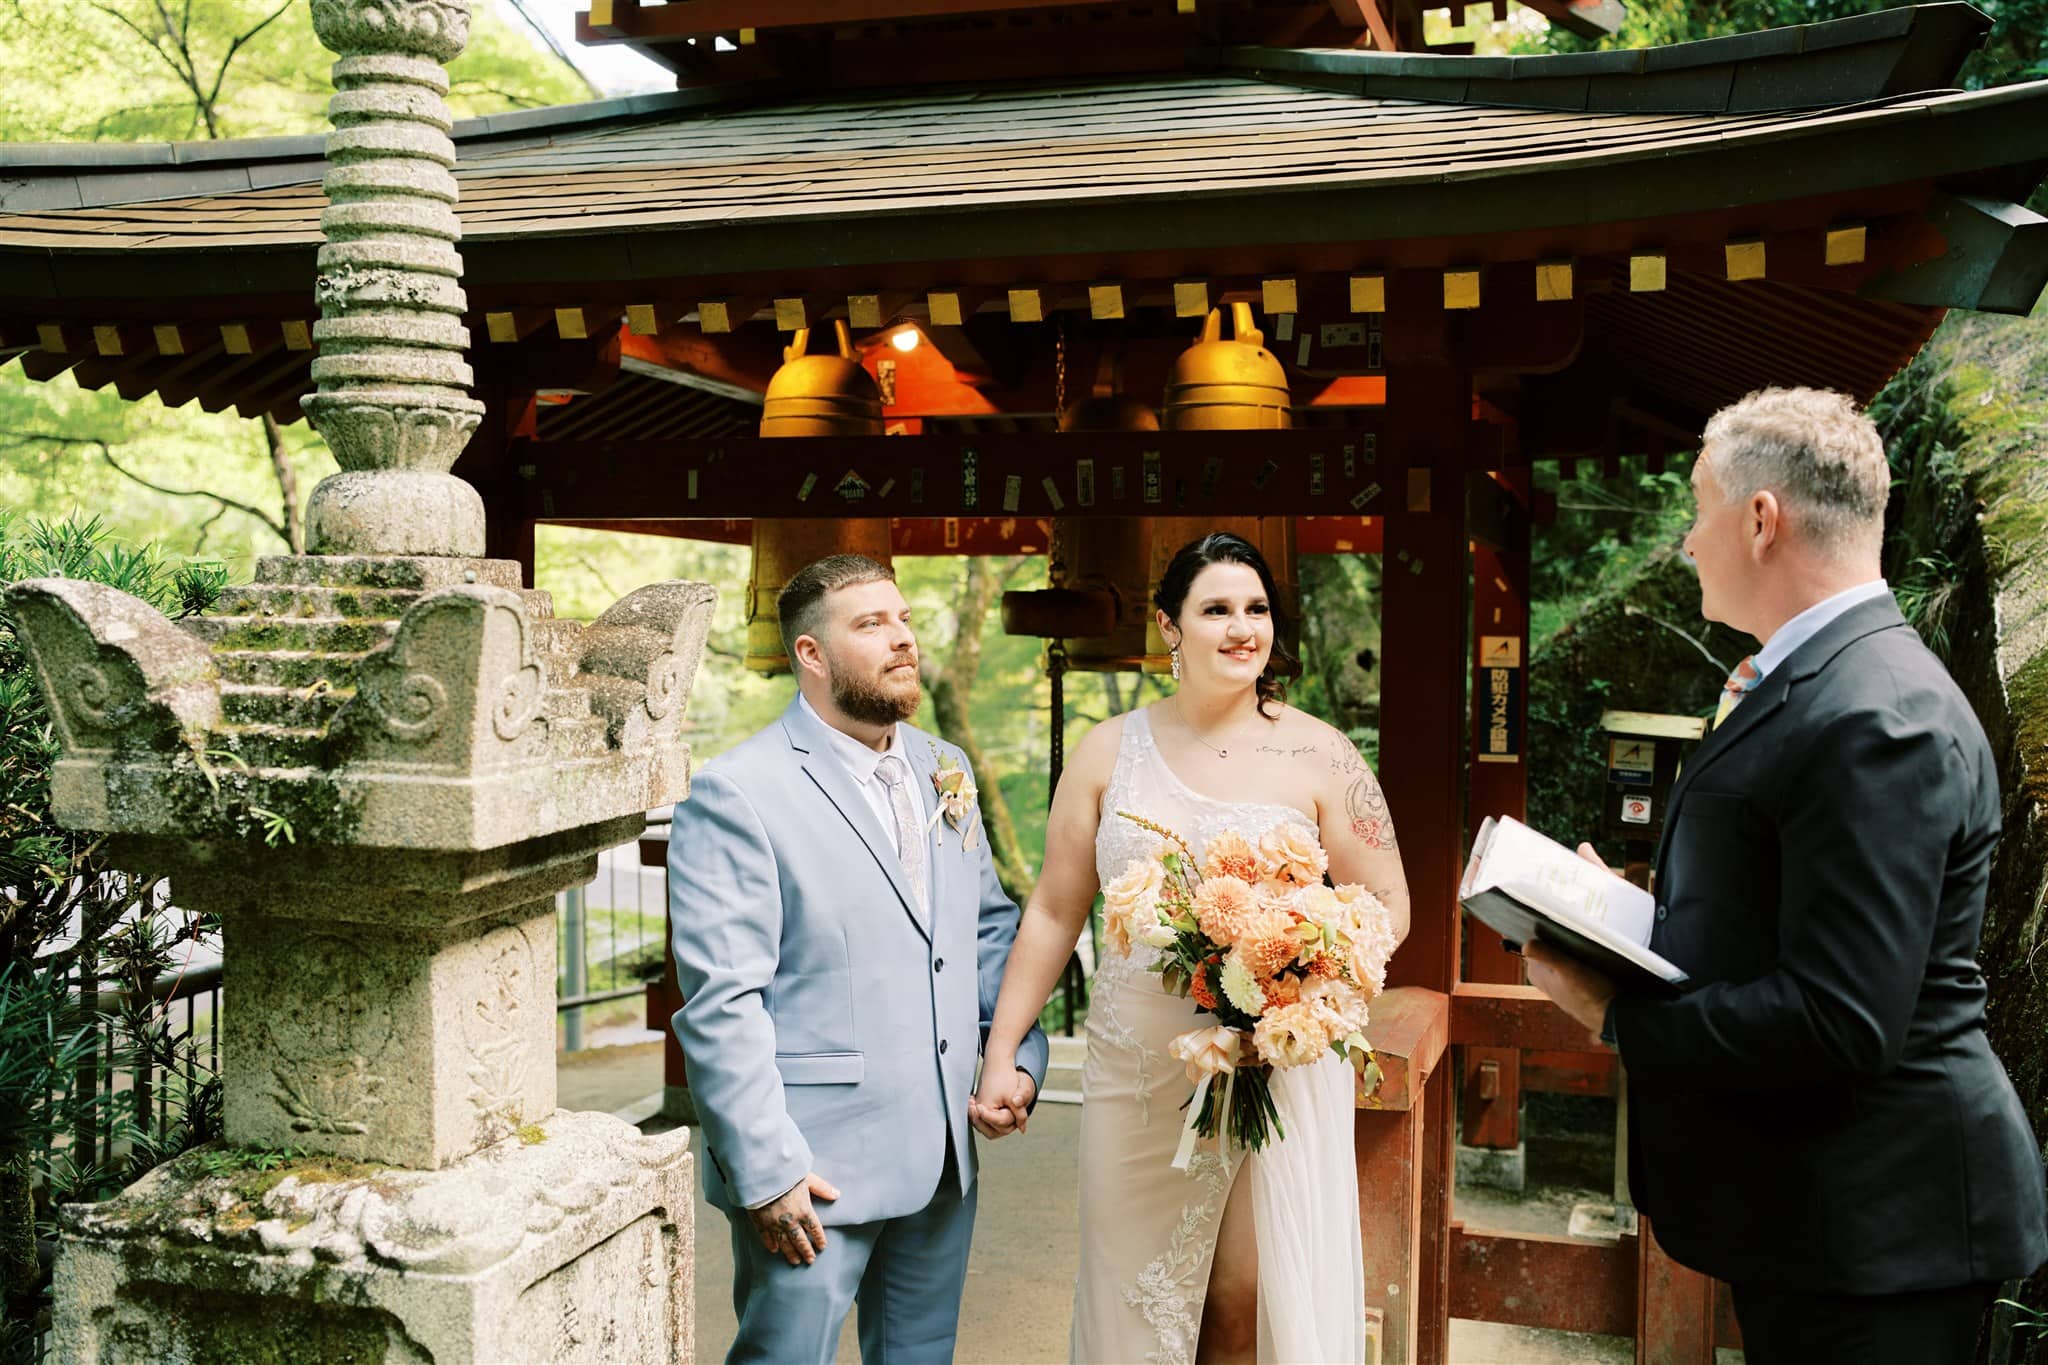 Kyoto Tokyo Japan Elopement Wedding Photographer, Planner & Videographer | A bride and groom exchange vows in front of a pagoda during their intimate Japan elopement, captured by a talented photographer.